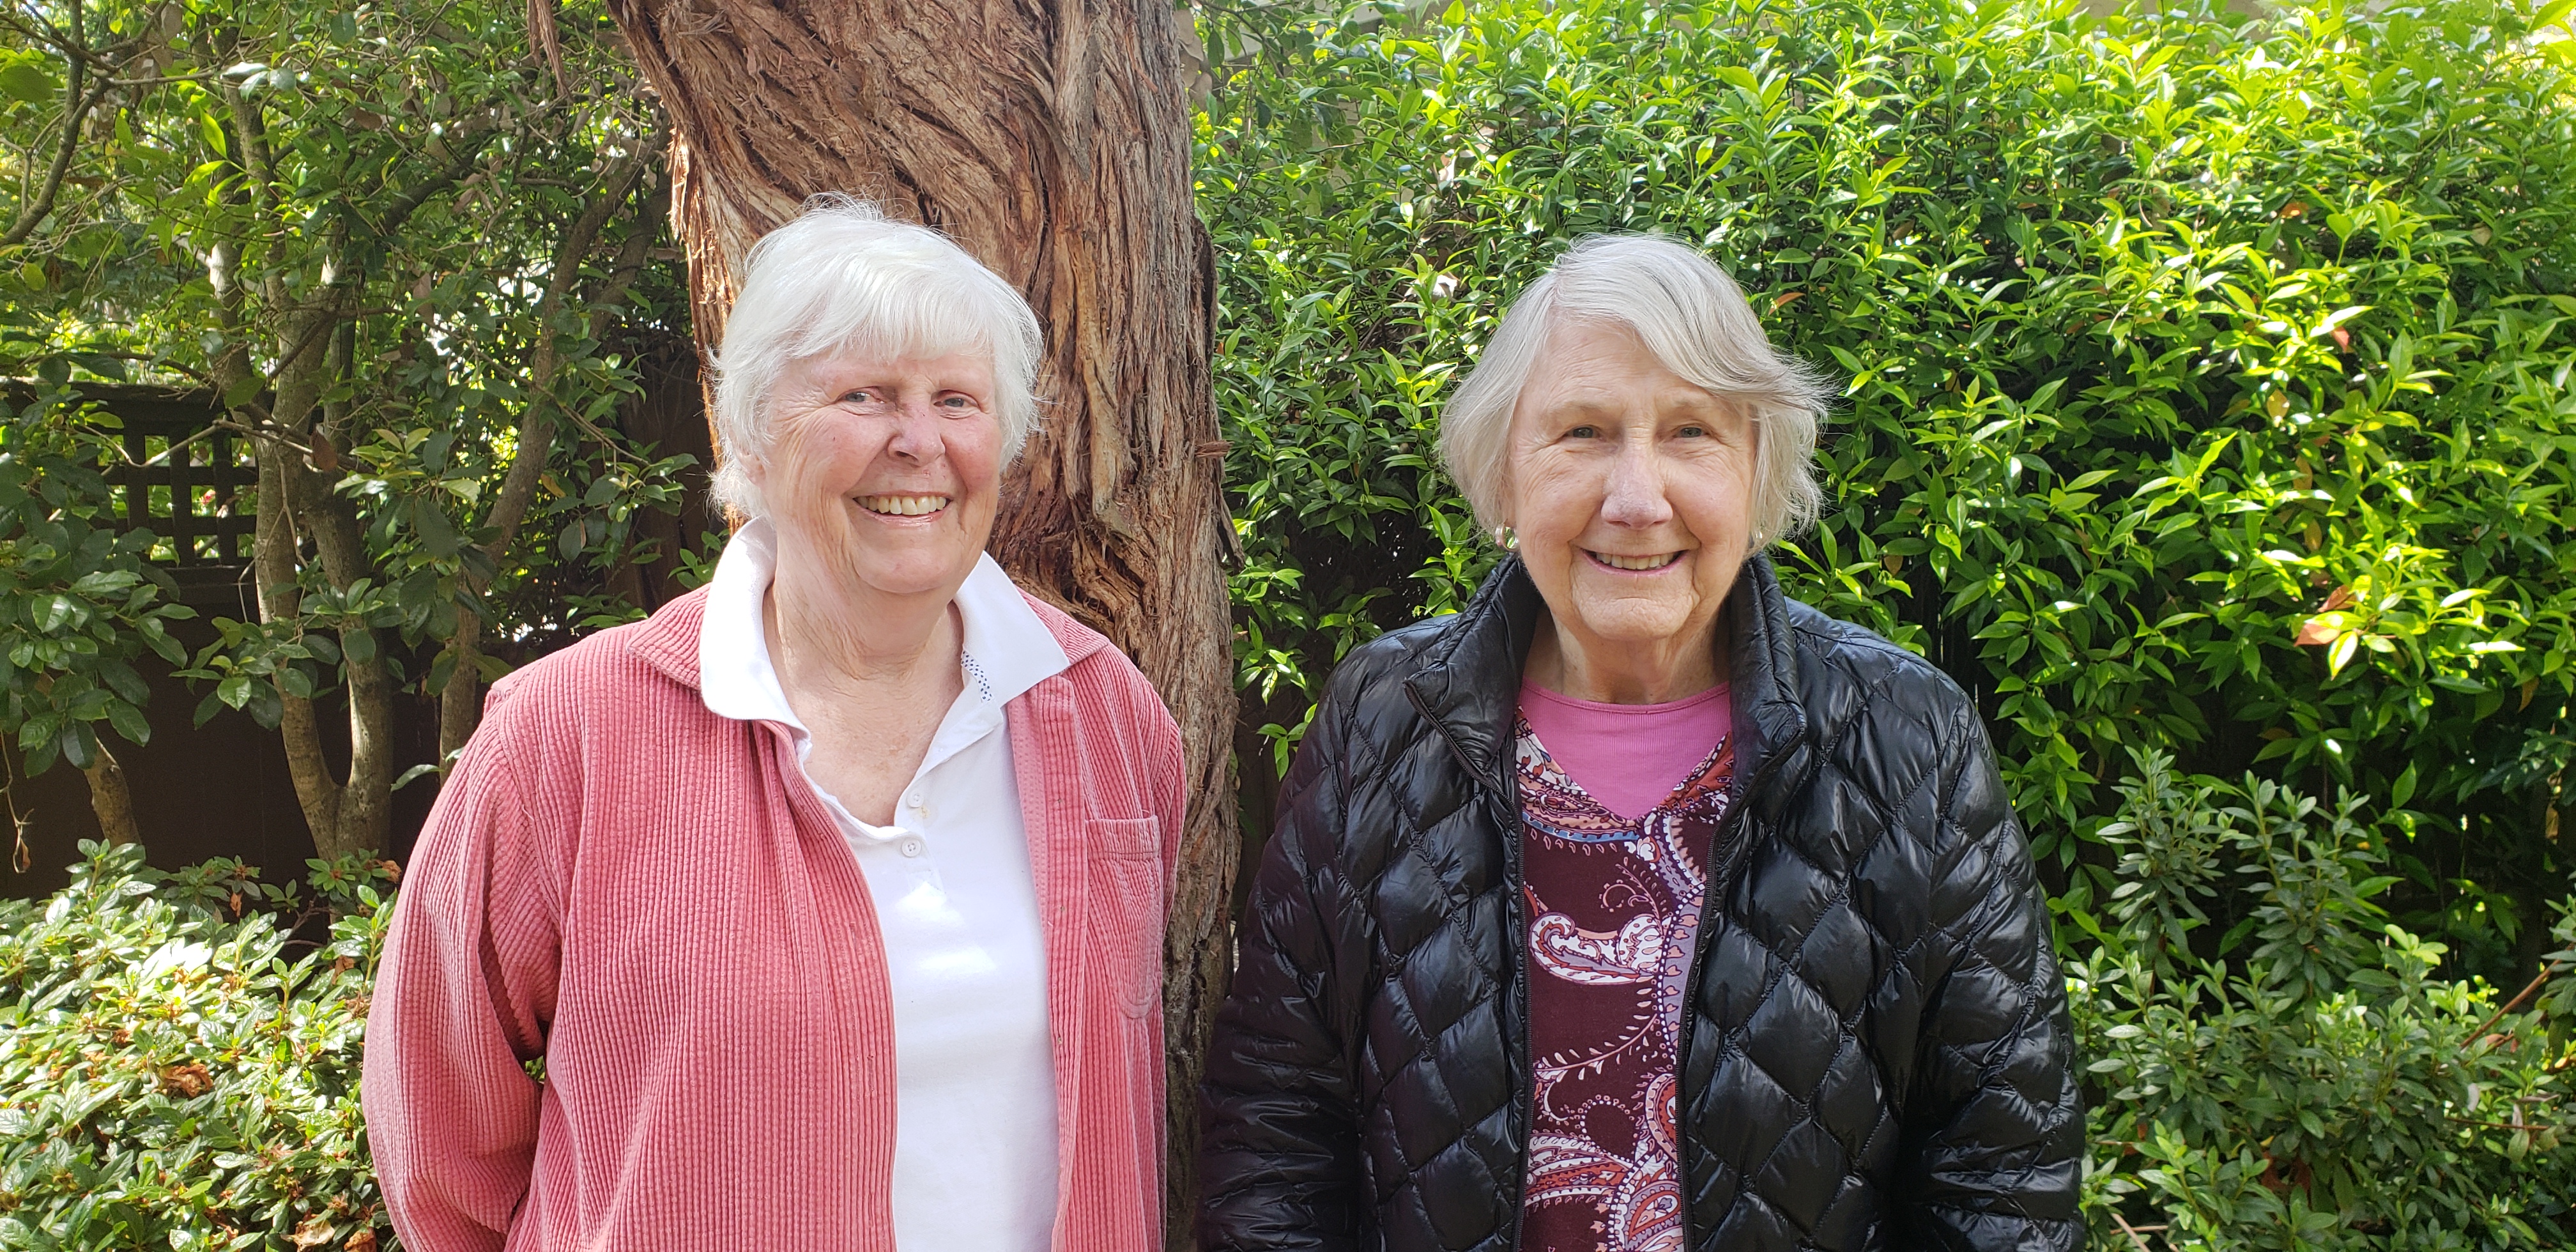 Enid Pearson and Emily Renzel - 2019 Guardians of Nature Honorees 